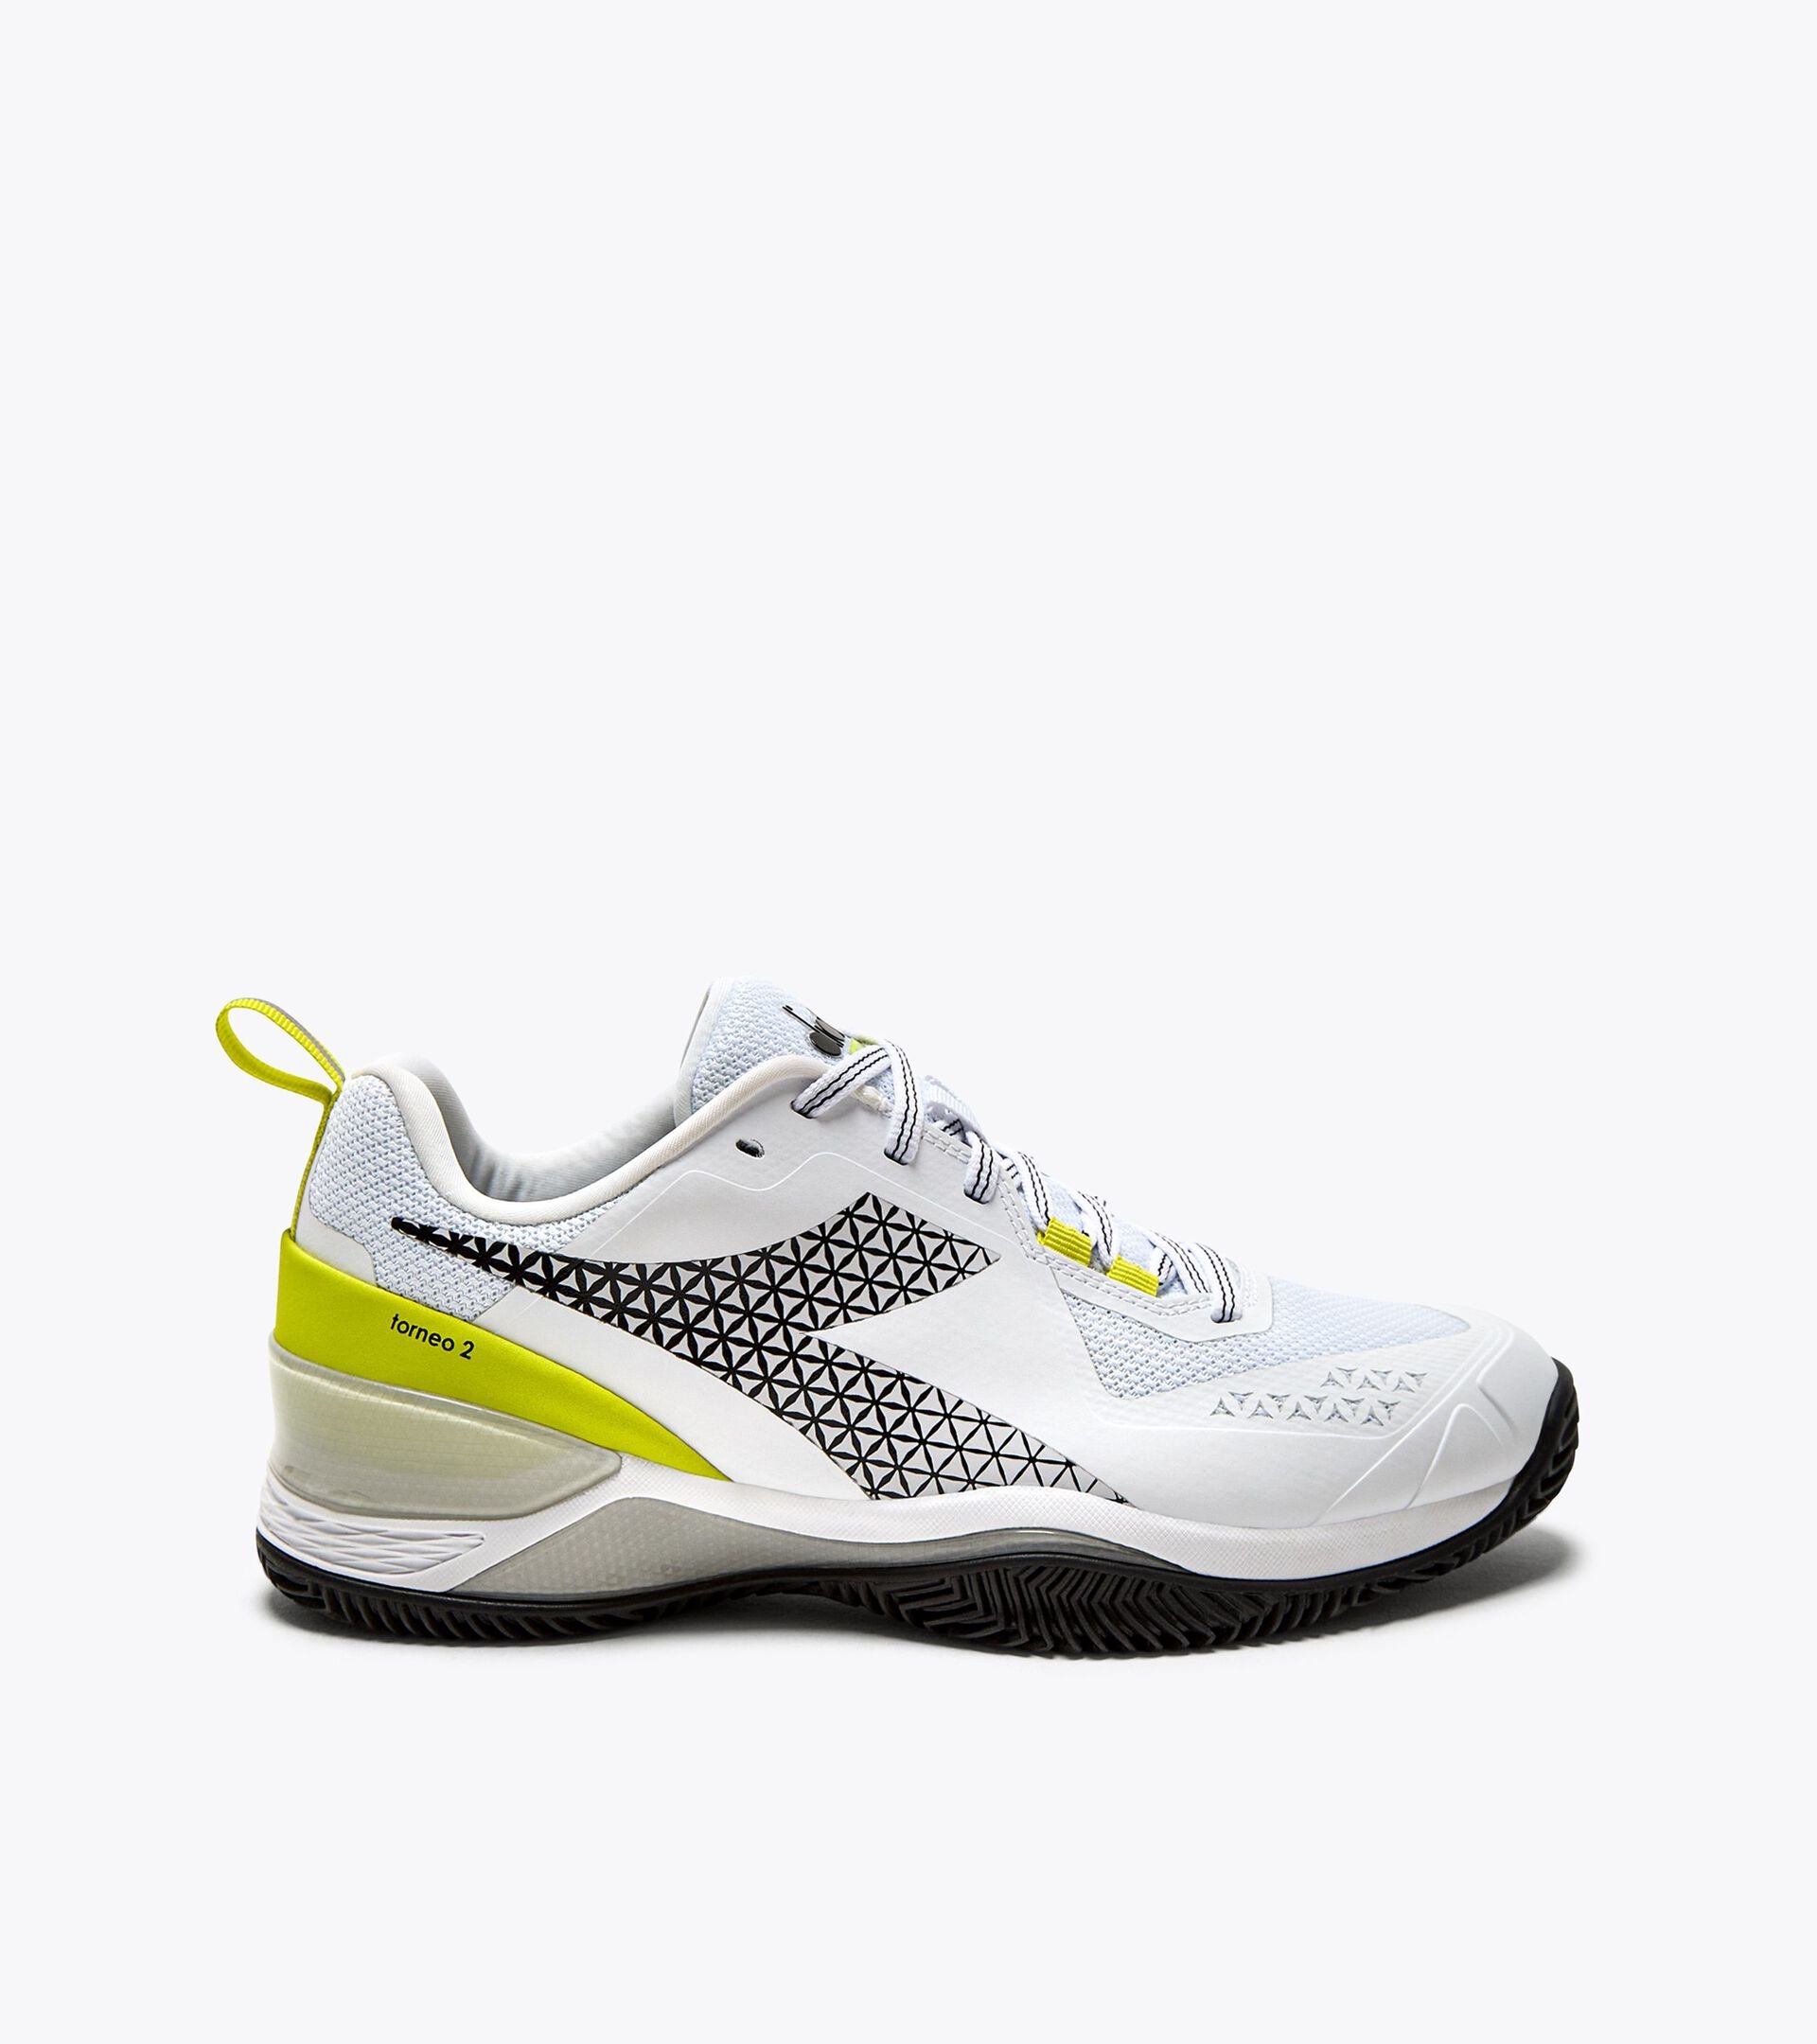 BLUSHIELD TORNEO 2 W CLAY Tennis shoes for clay courts - Women - Diadora  Online Store